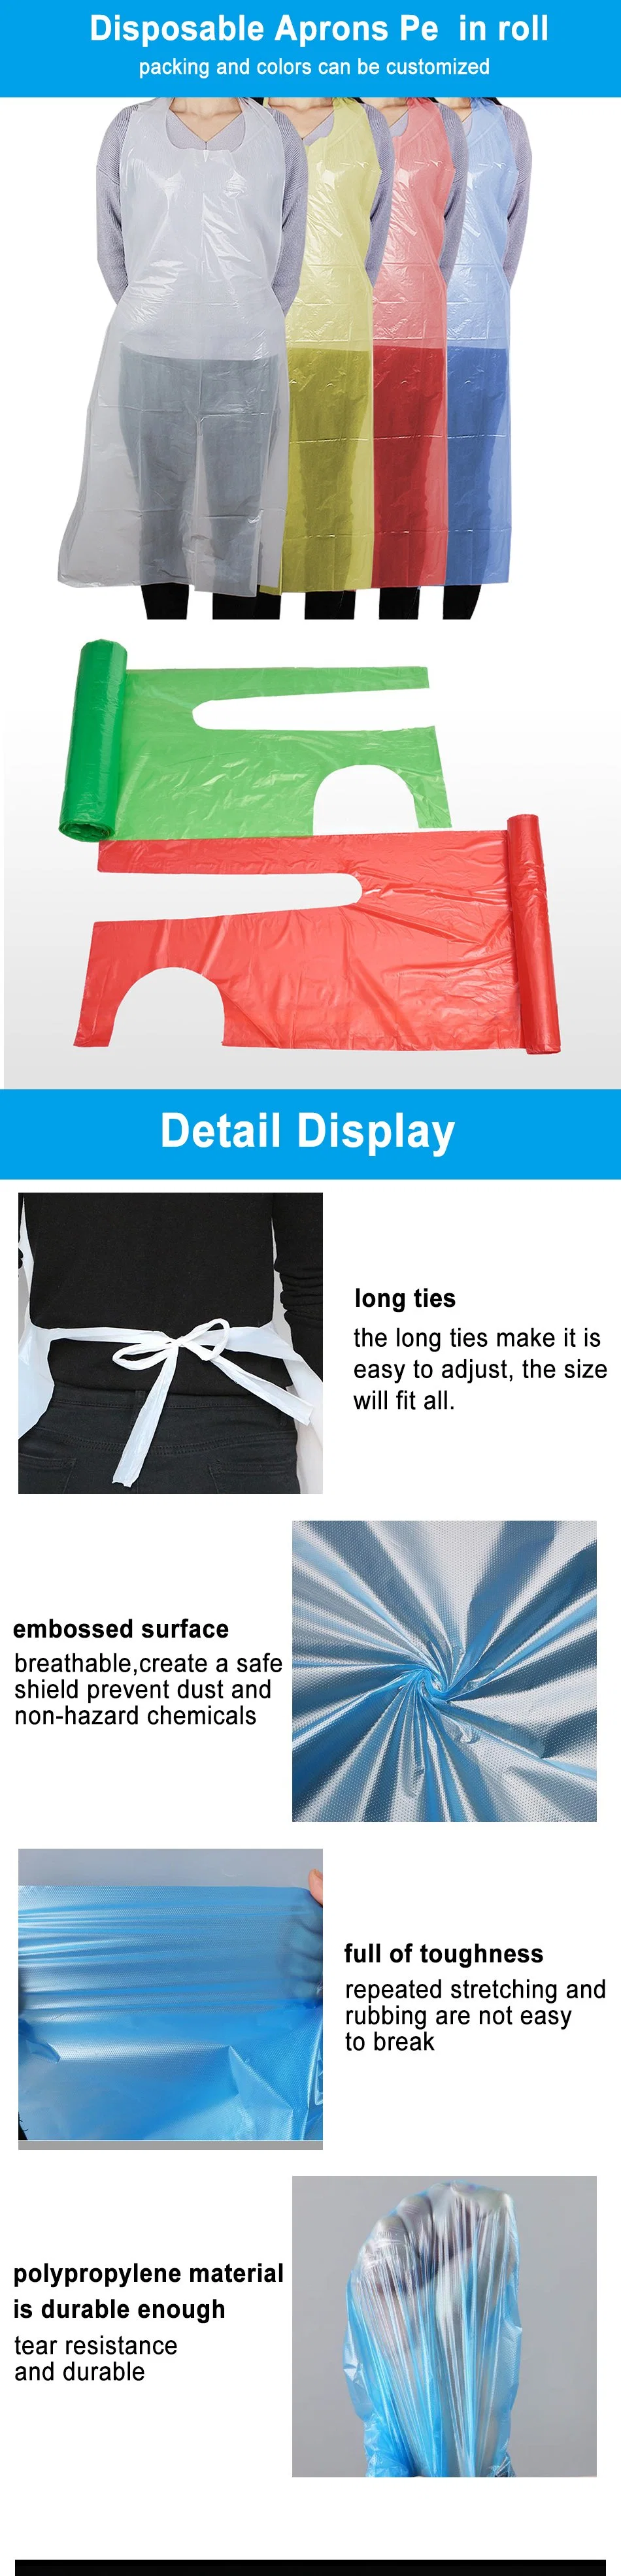 Plastic PE Aprons Difference Types of Single Use Disposable Aprons in Roll